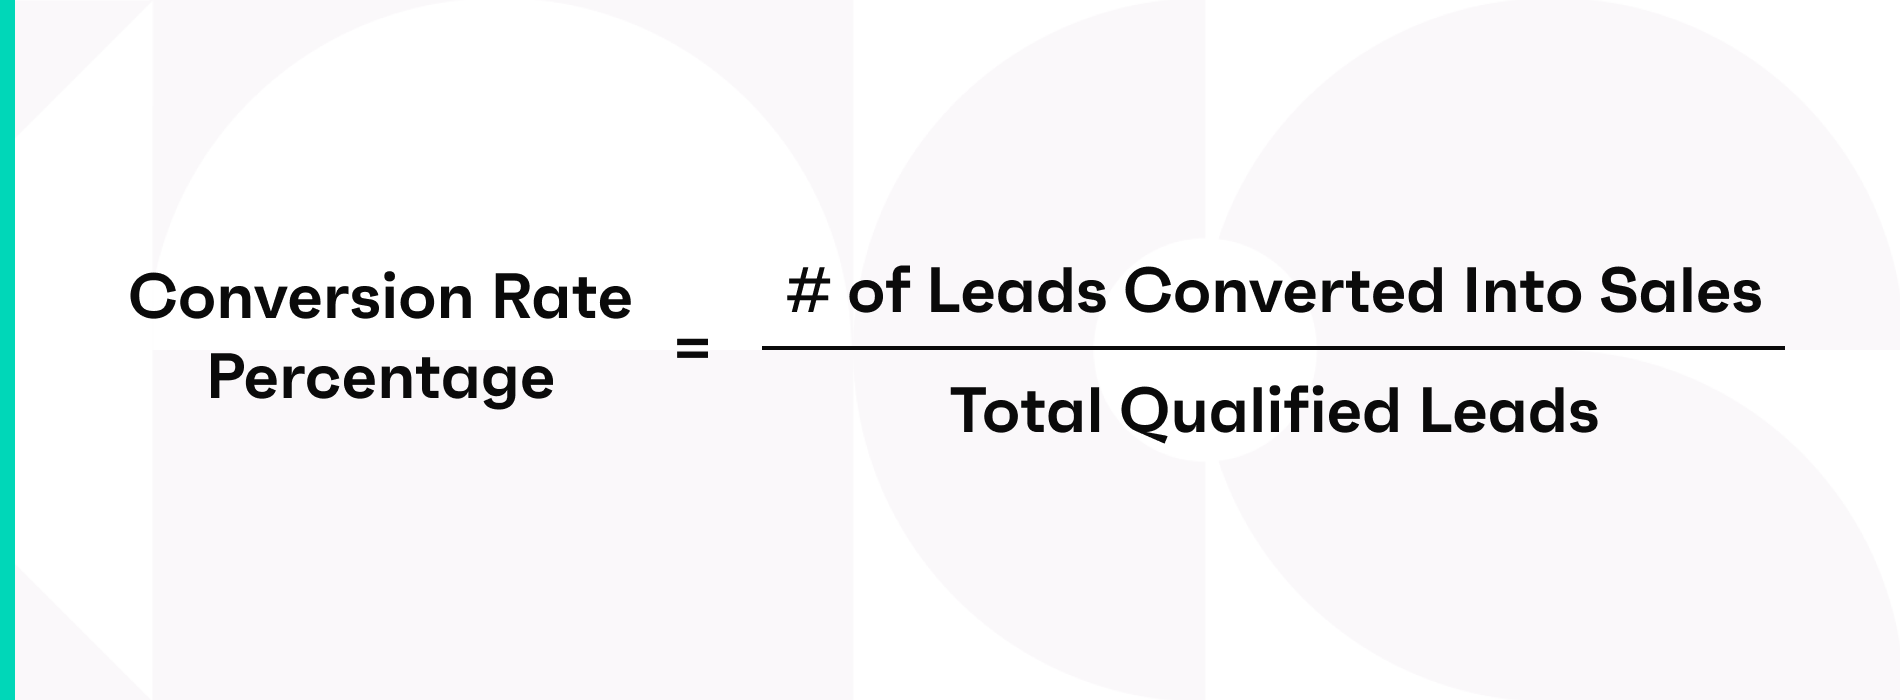 Conversion rate percentage = (# of leads converted into sales / total qualified leads)